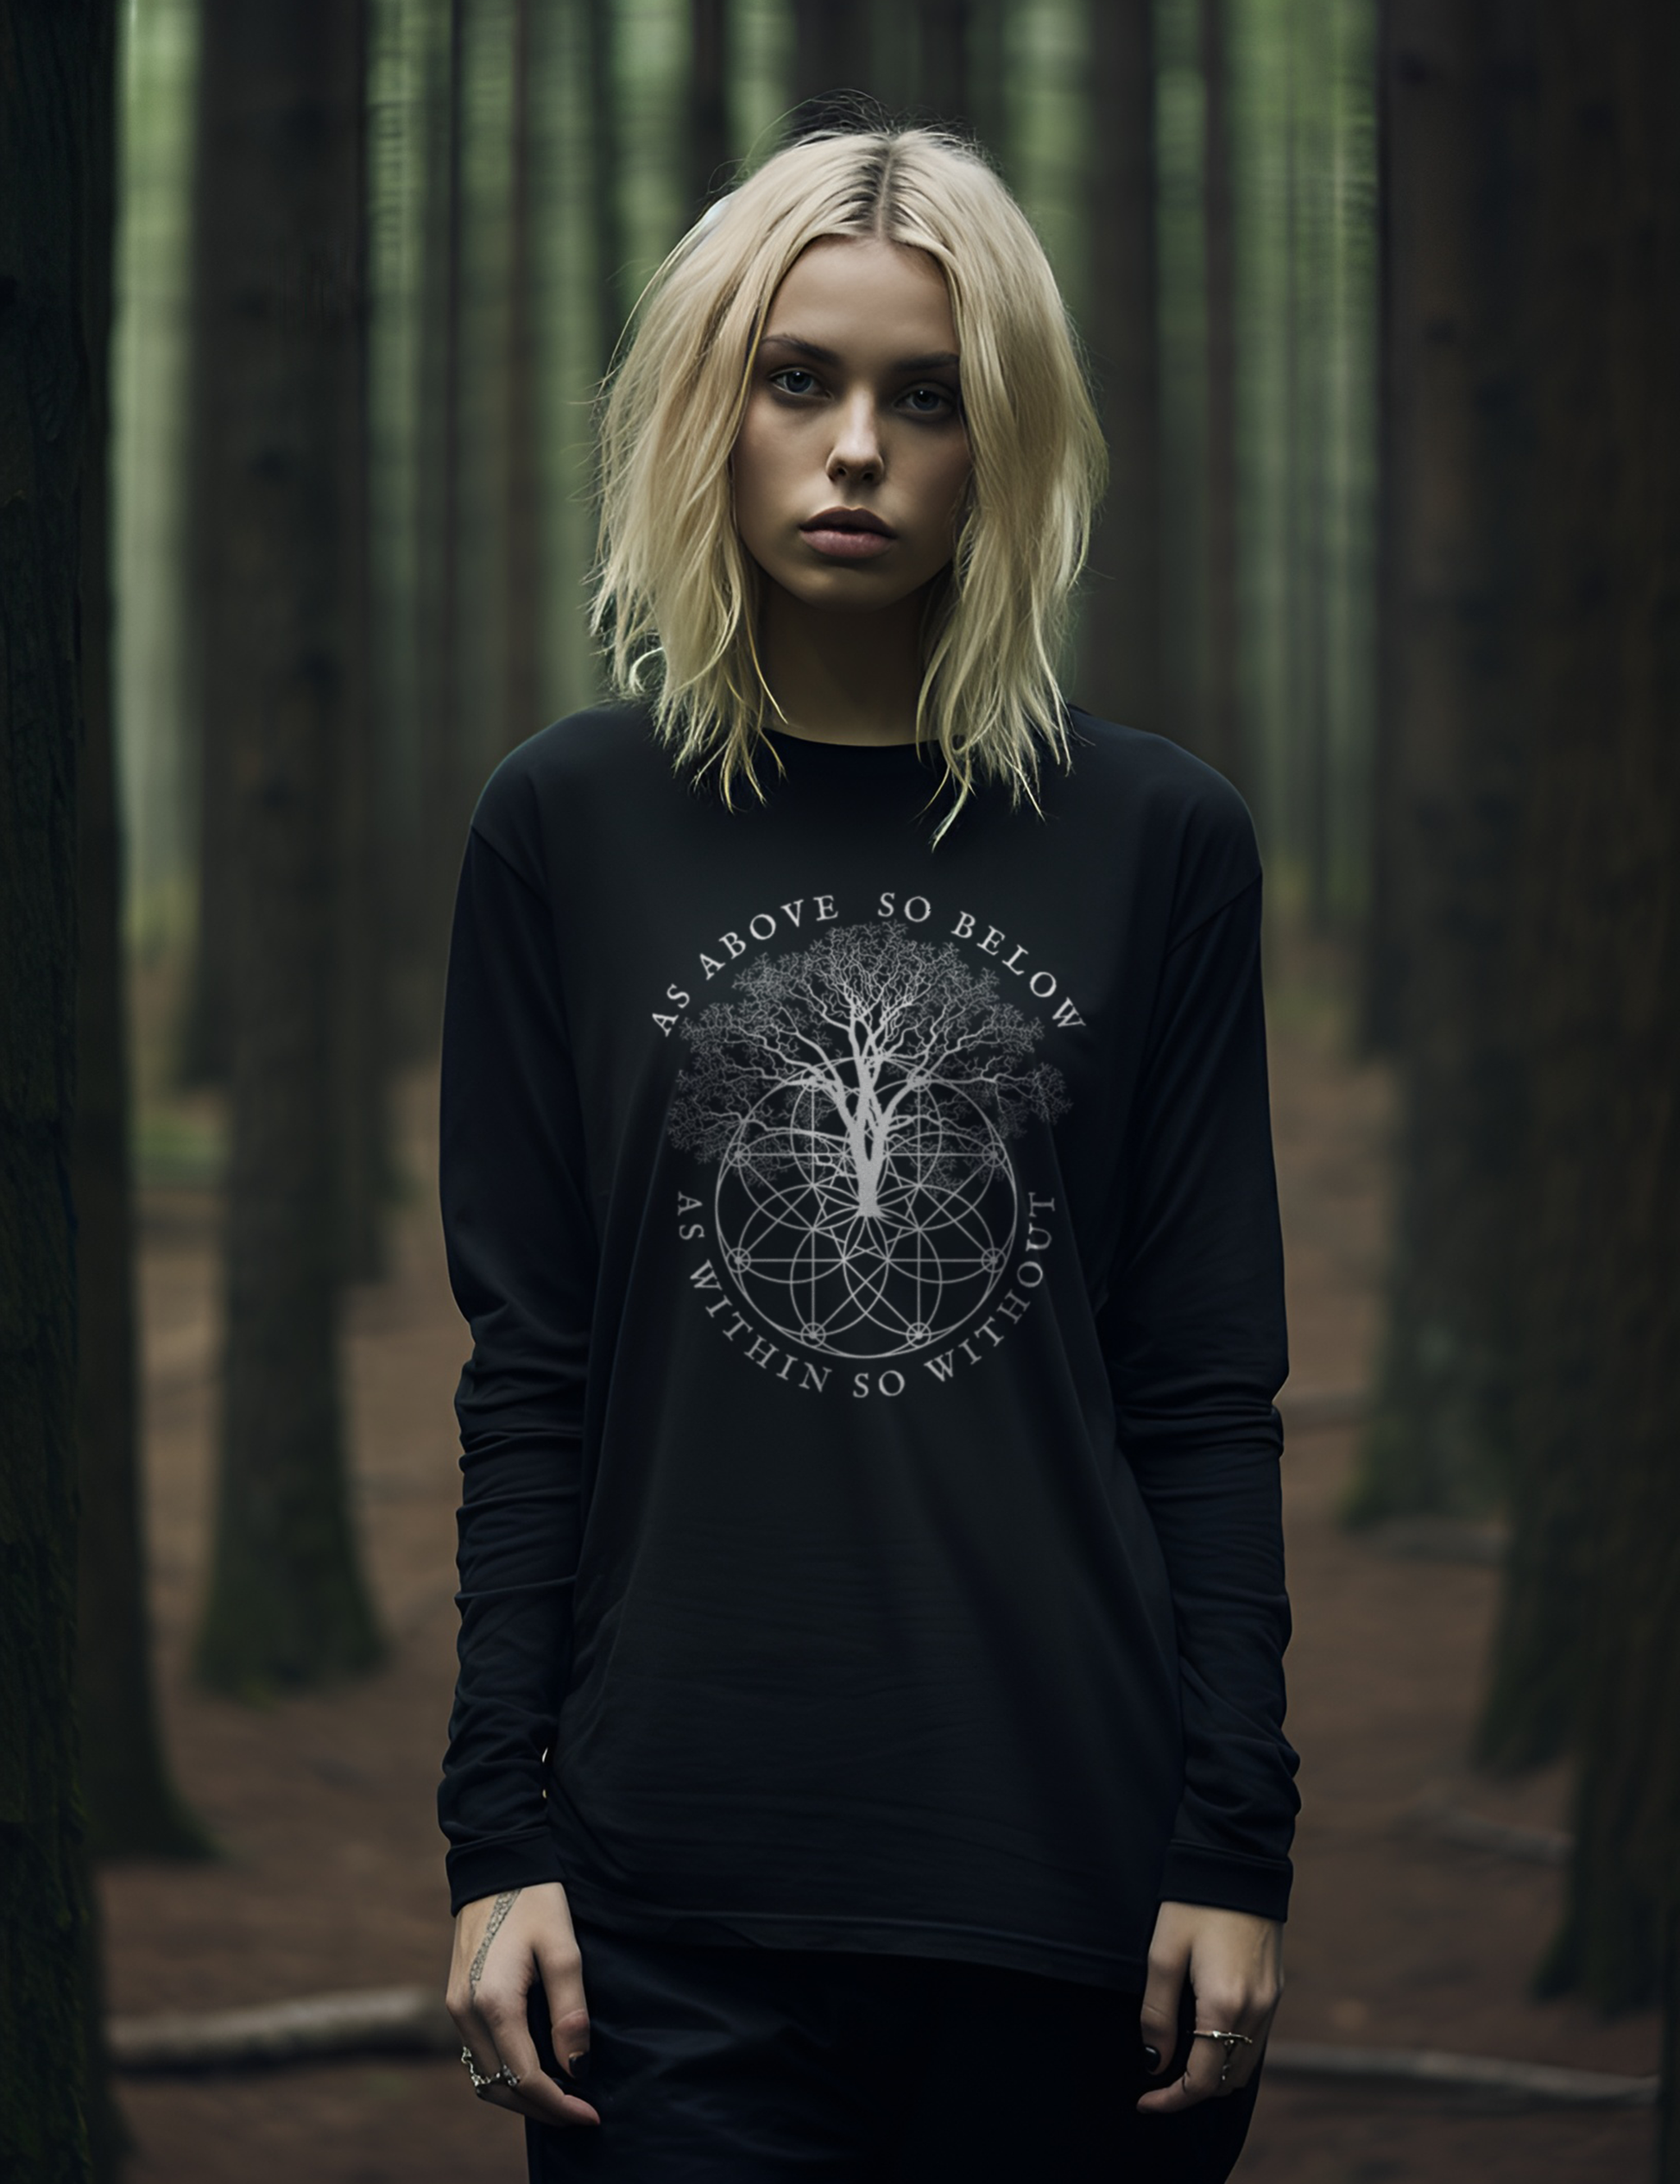 As Above So Below Occult Esoteric Tree Sacred Geometry Plus Size Goth Long Sleeve Womens Shirt